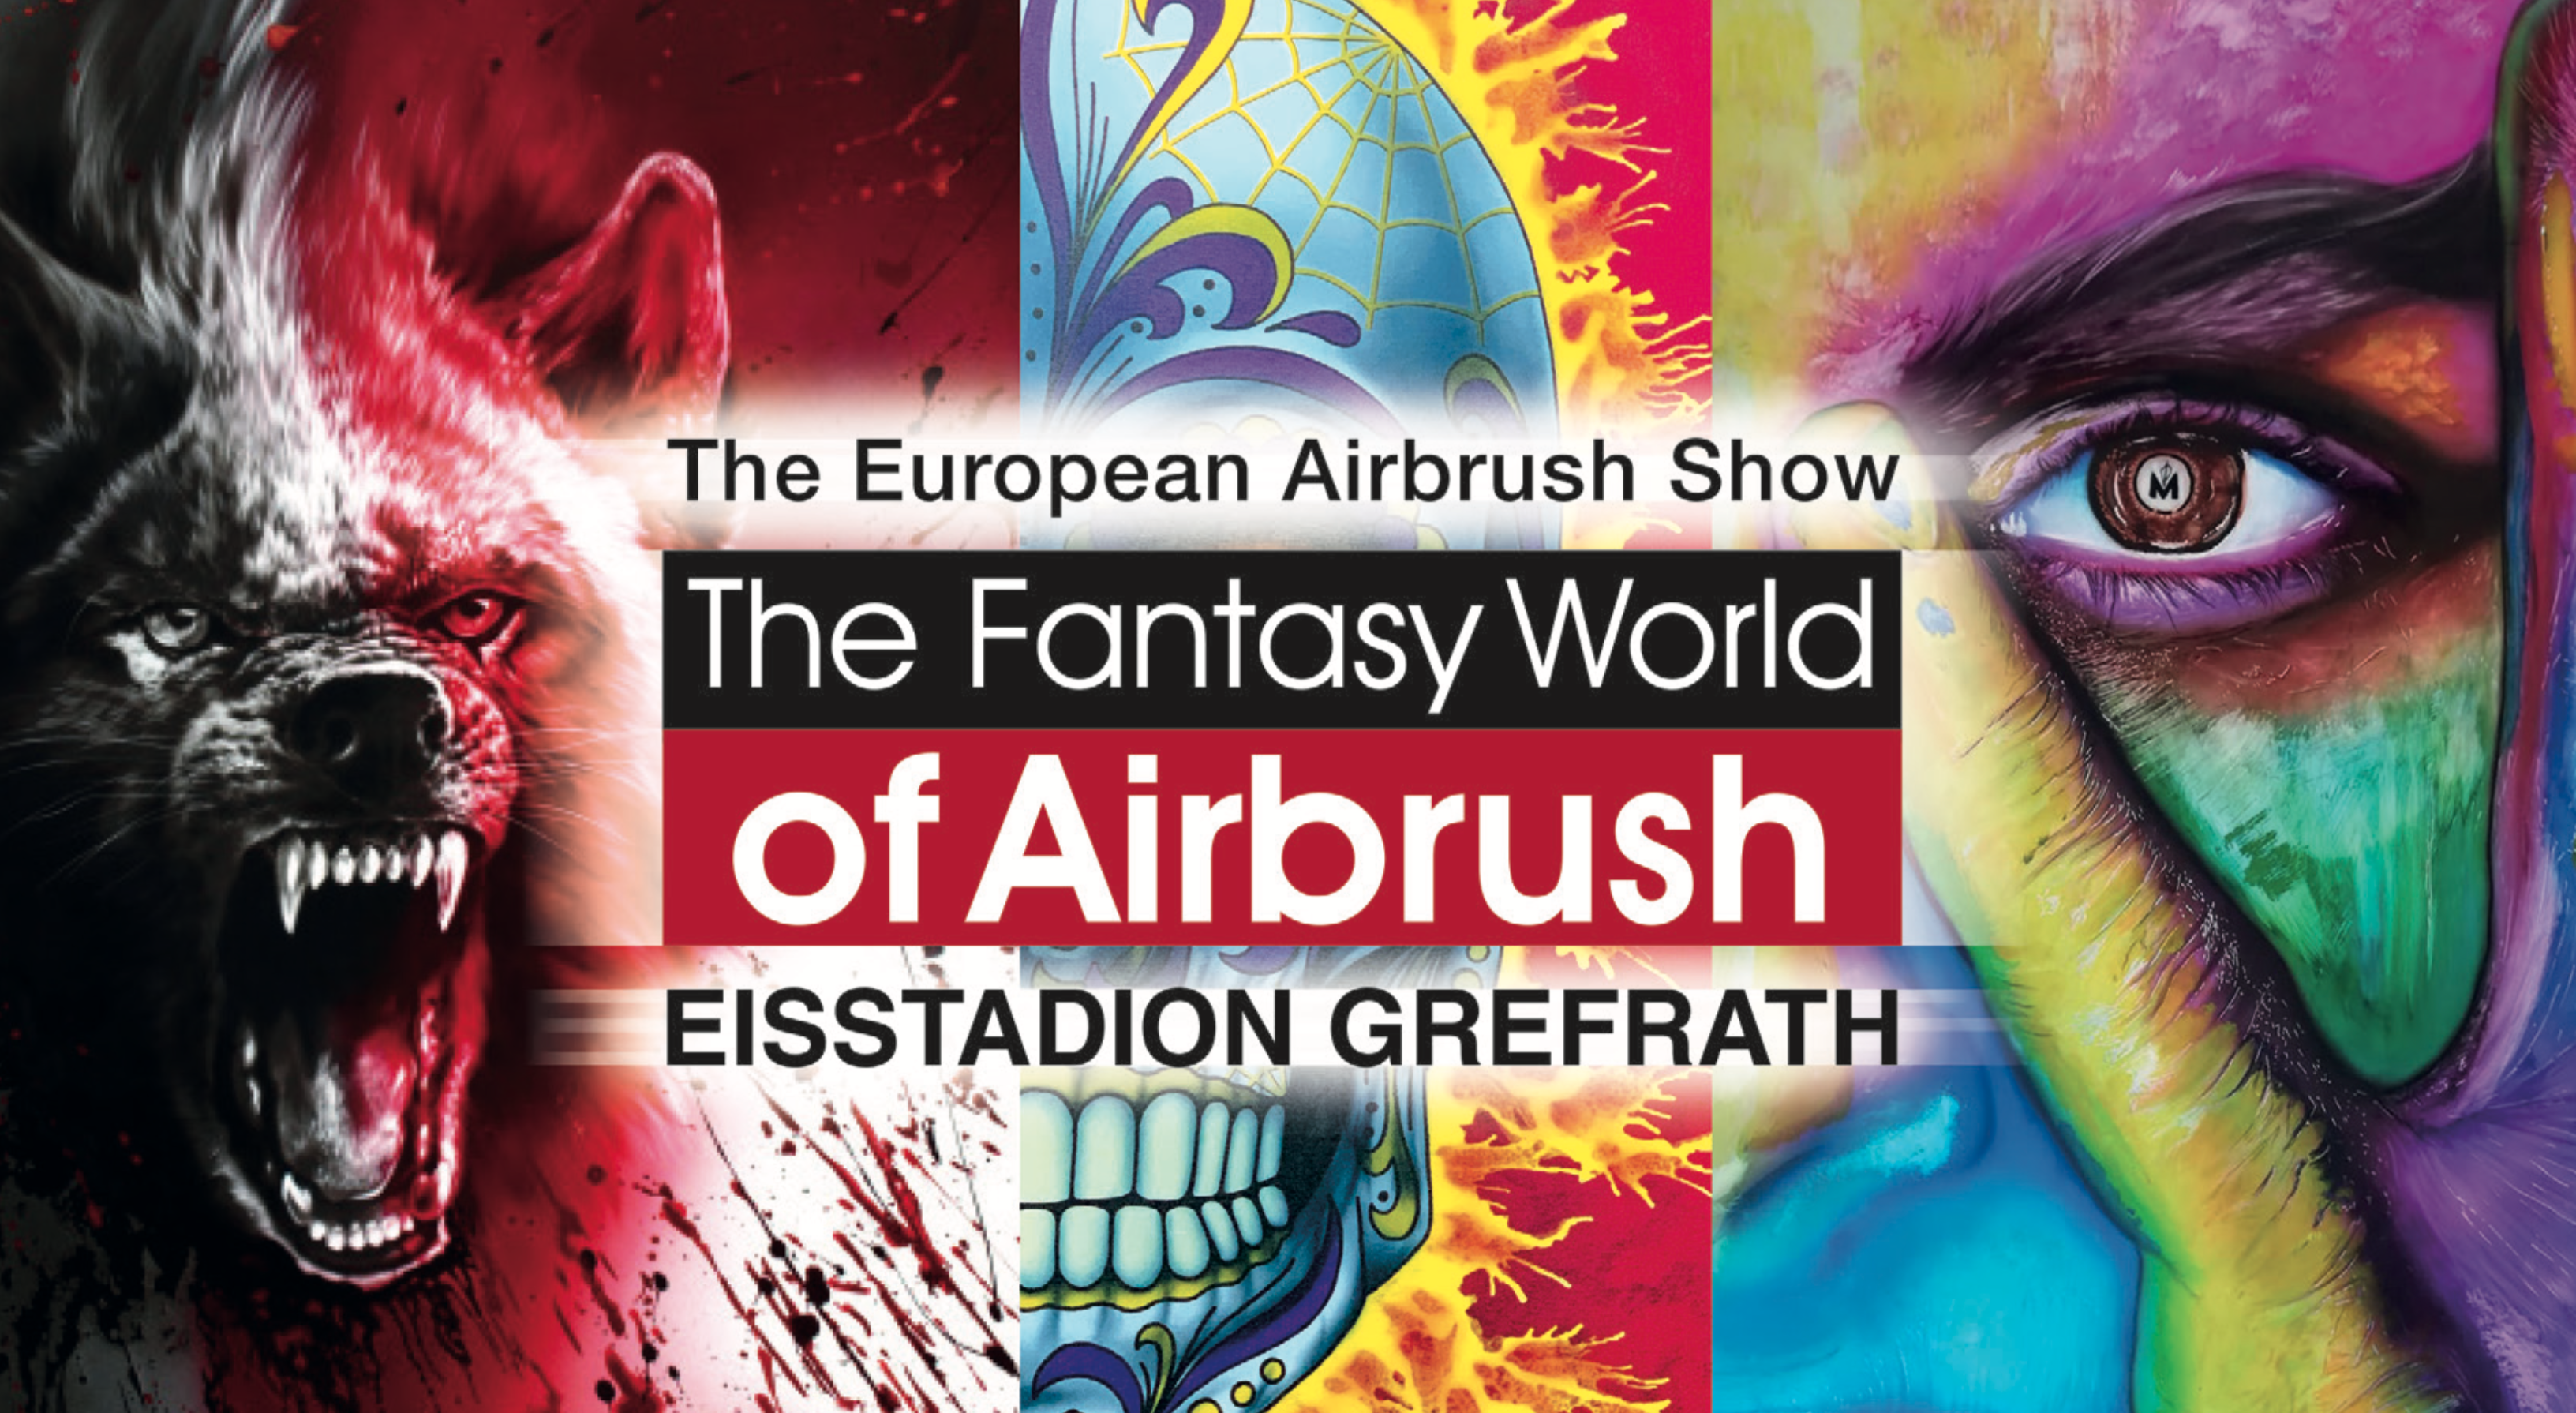 It’s Showtime: The Fantasy World of Airbrush in Grefrath